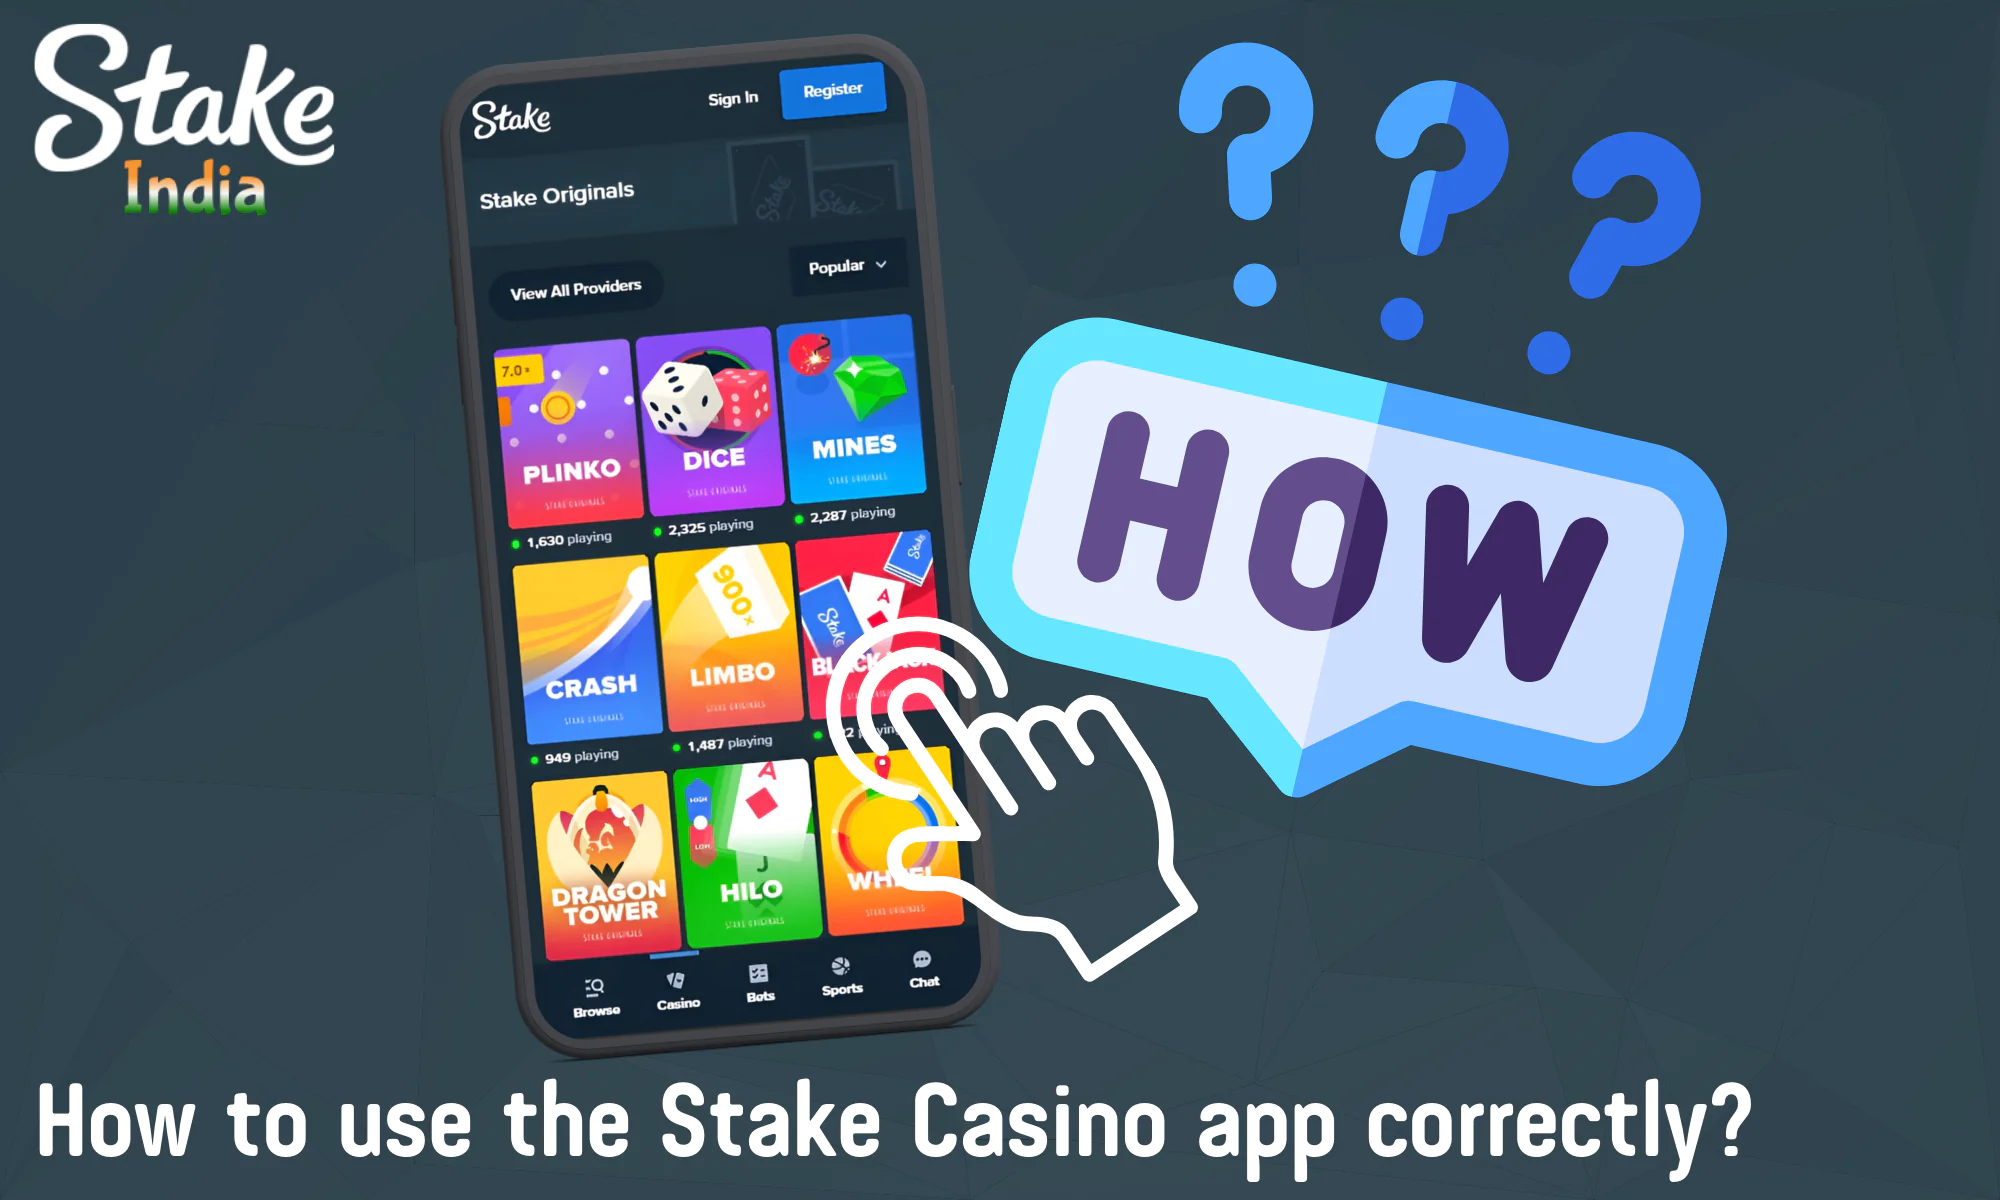 Instructions for using the Stake Casino app